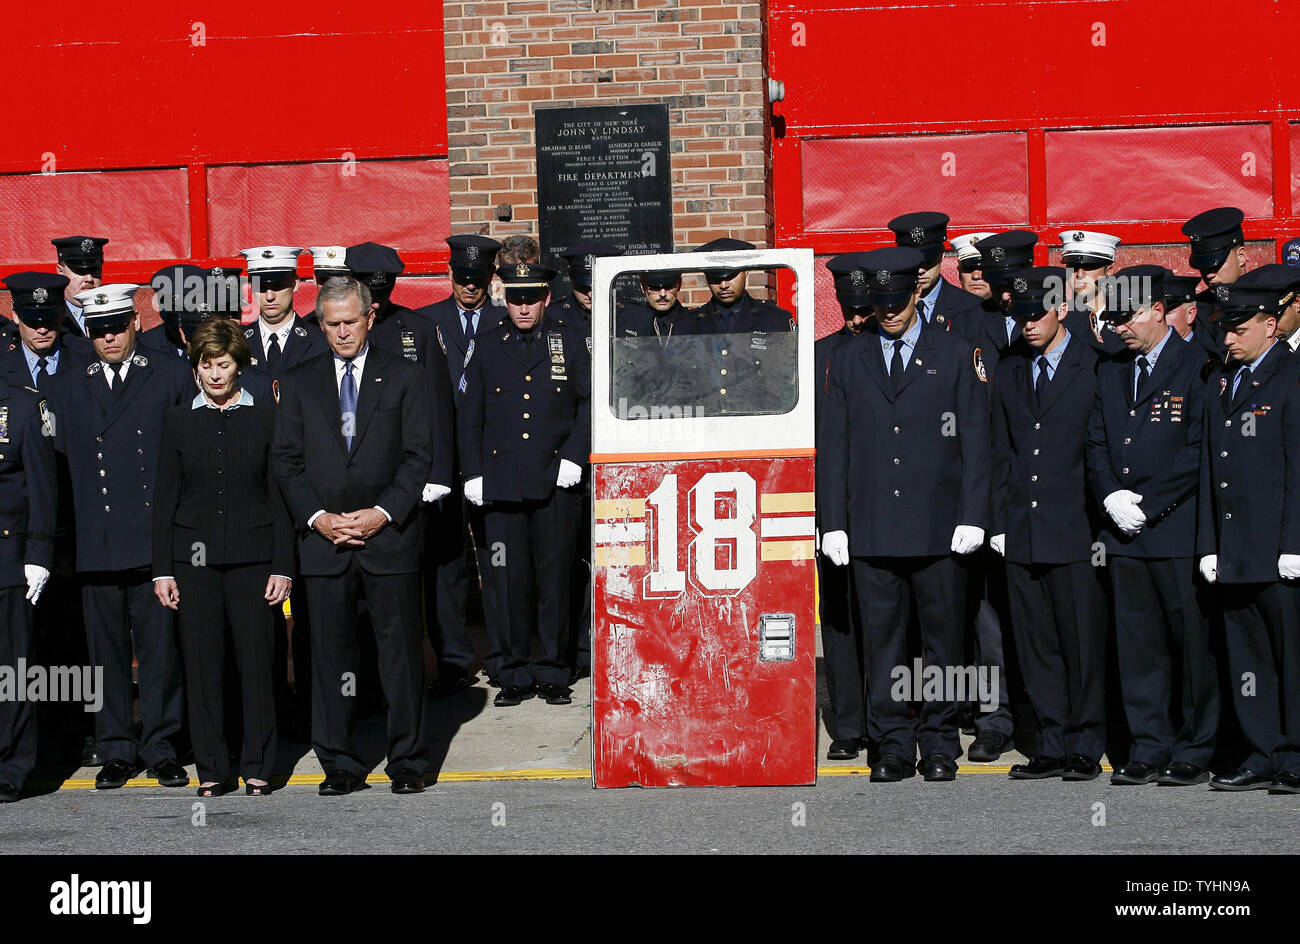 President George W. Bush and First Lady Laura Bush observe a moment of silence at the memorial ceremony at Fort Pitt Firehouse commemorating the fifth anniversary of September 11, 2001 in New York, NY on September 11, 2006.  The '18' door was on New York City's No. 18 Ladder Fire Truck that was destroyed when the World Trade Center towers collapsed. (UPI Photo/John Angelillo) Stock Photo